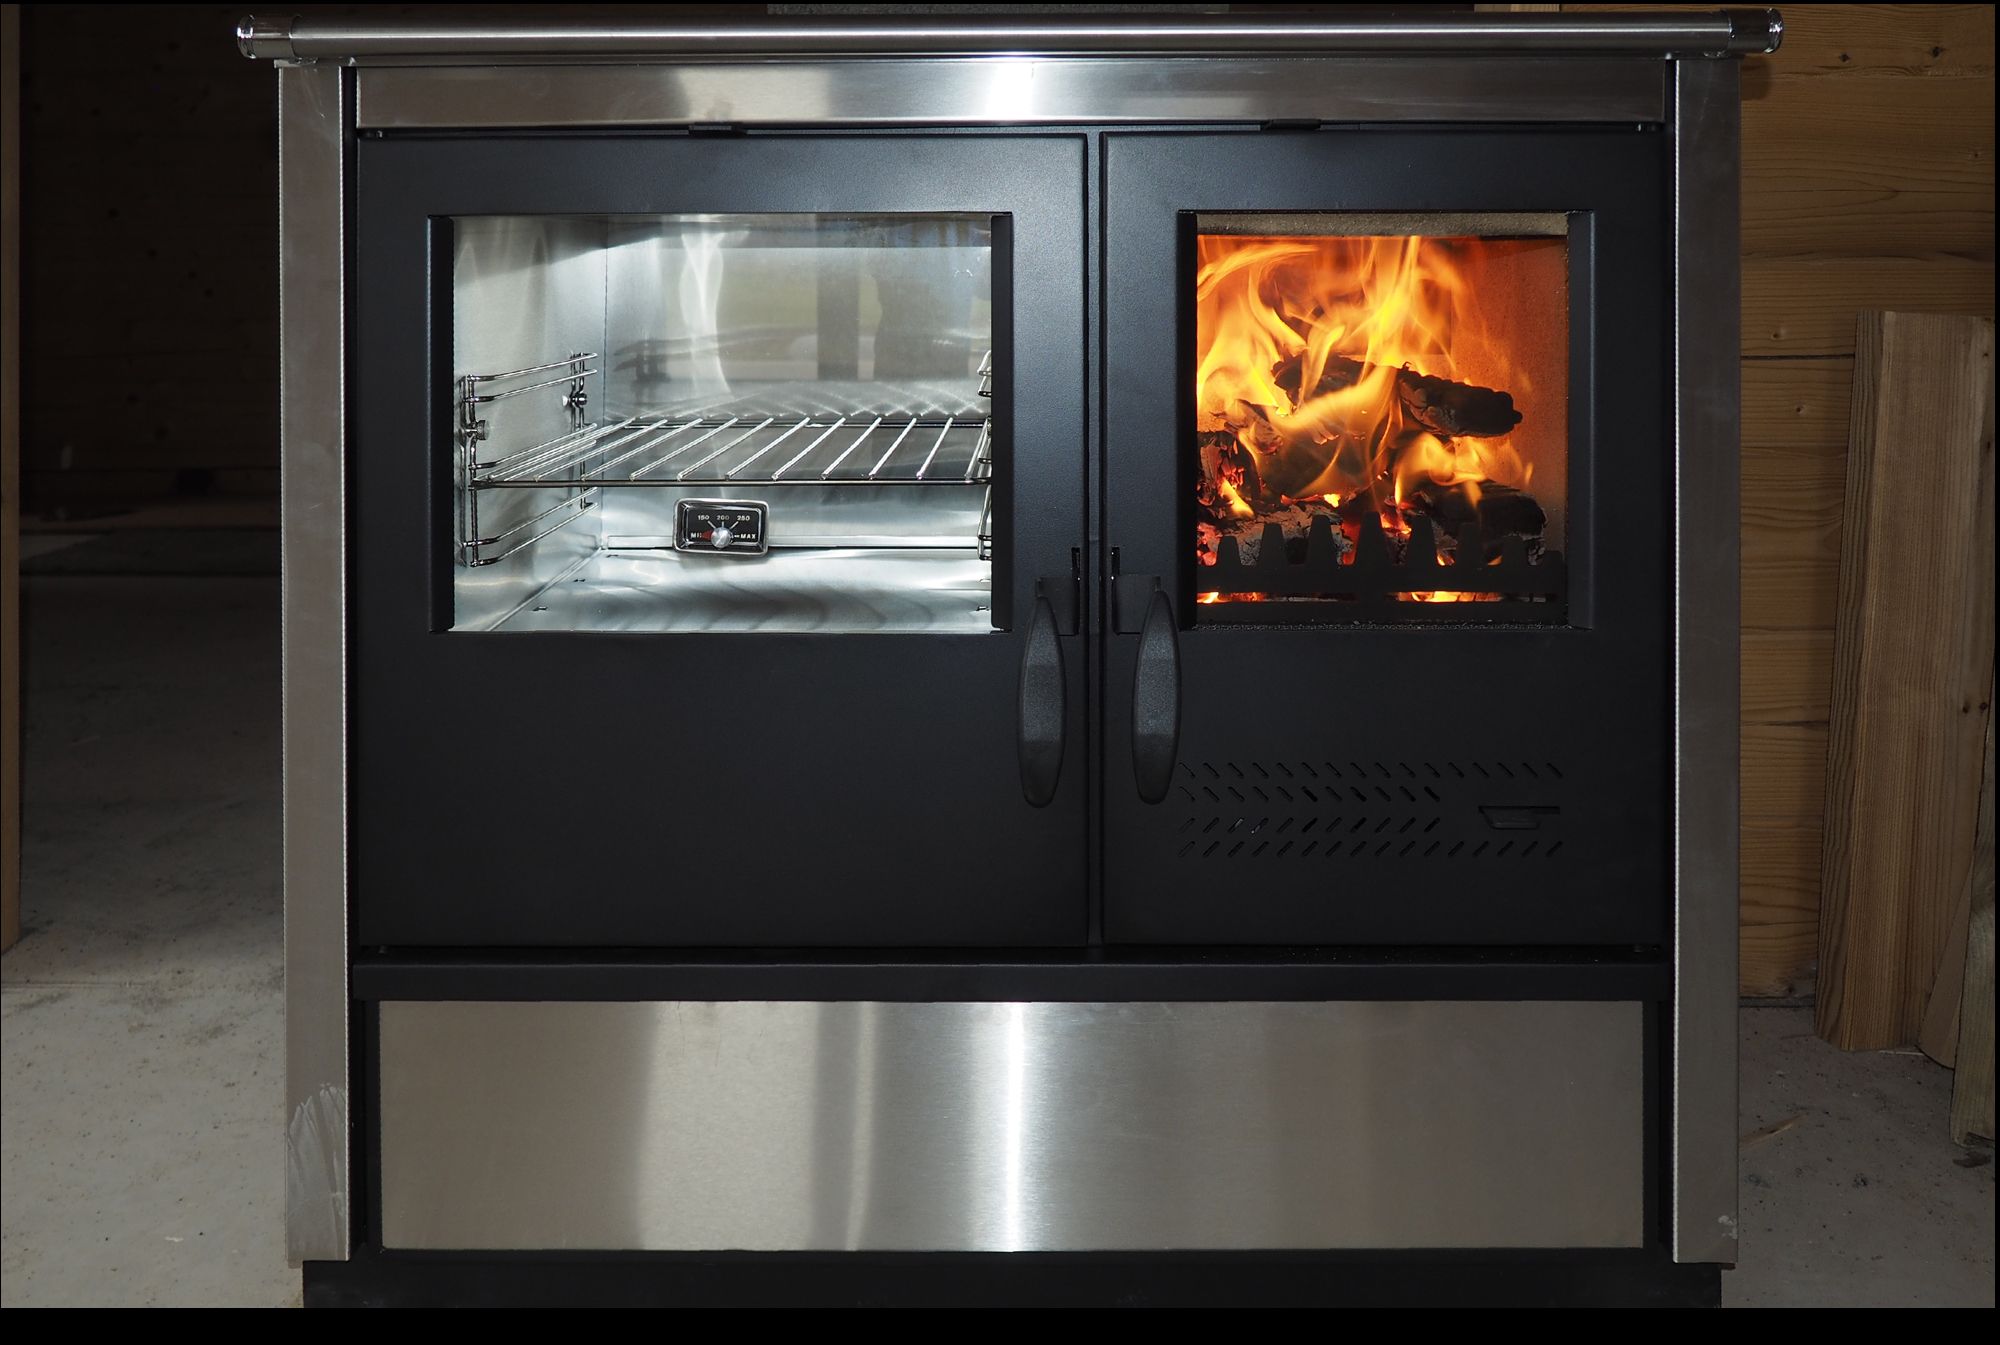 Woodburning cooker North Eco with ceramic cooktop left 9kW